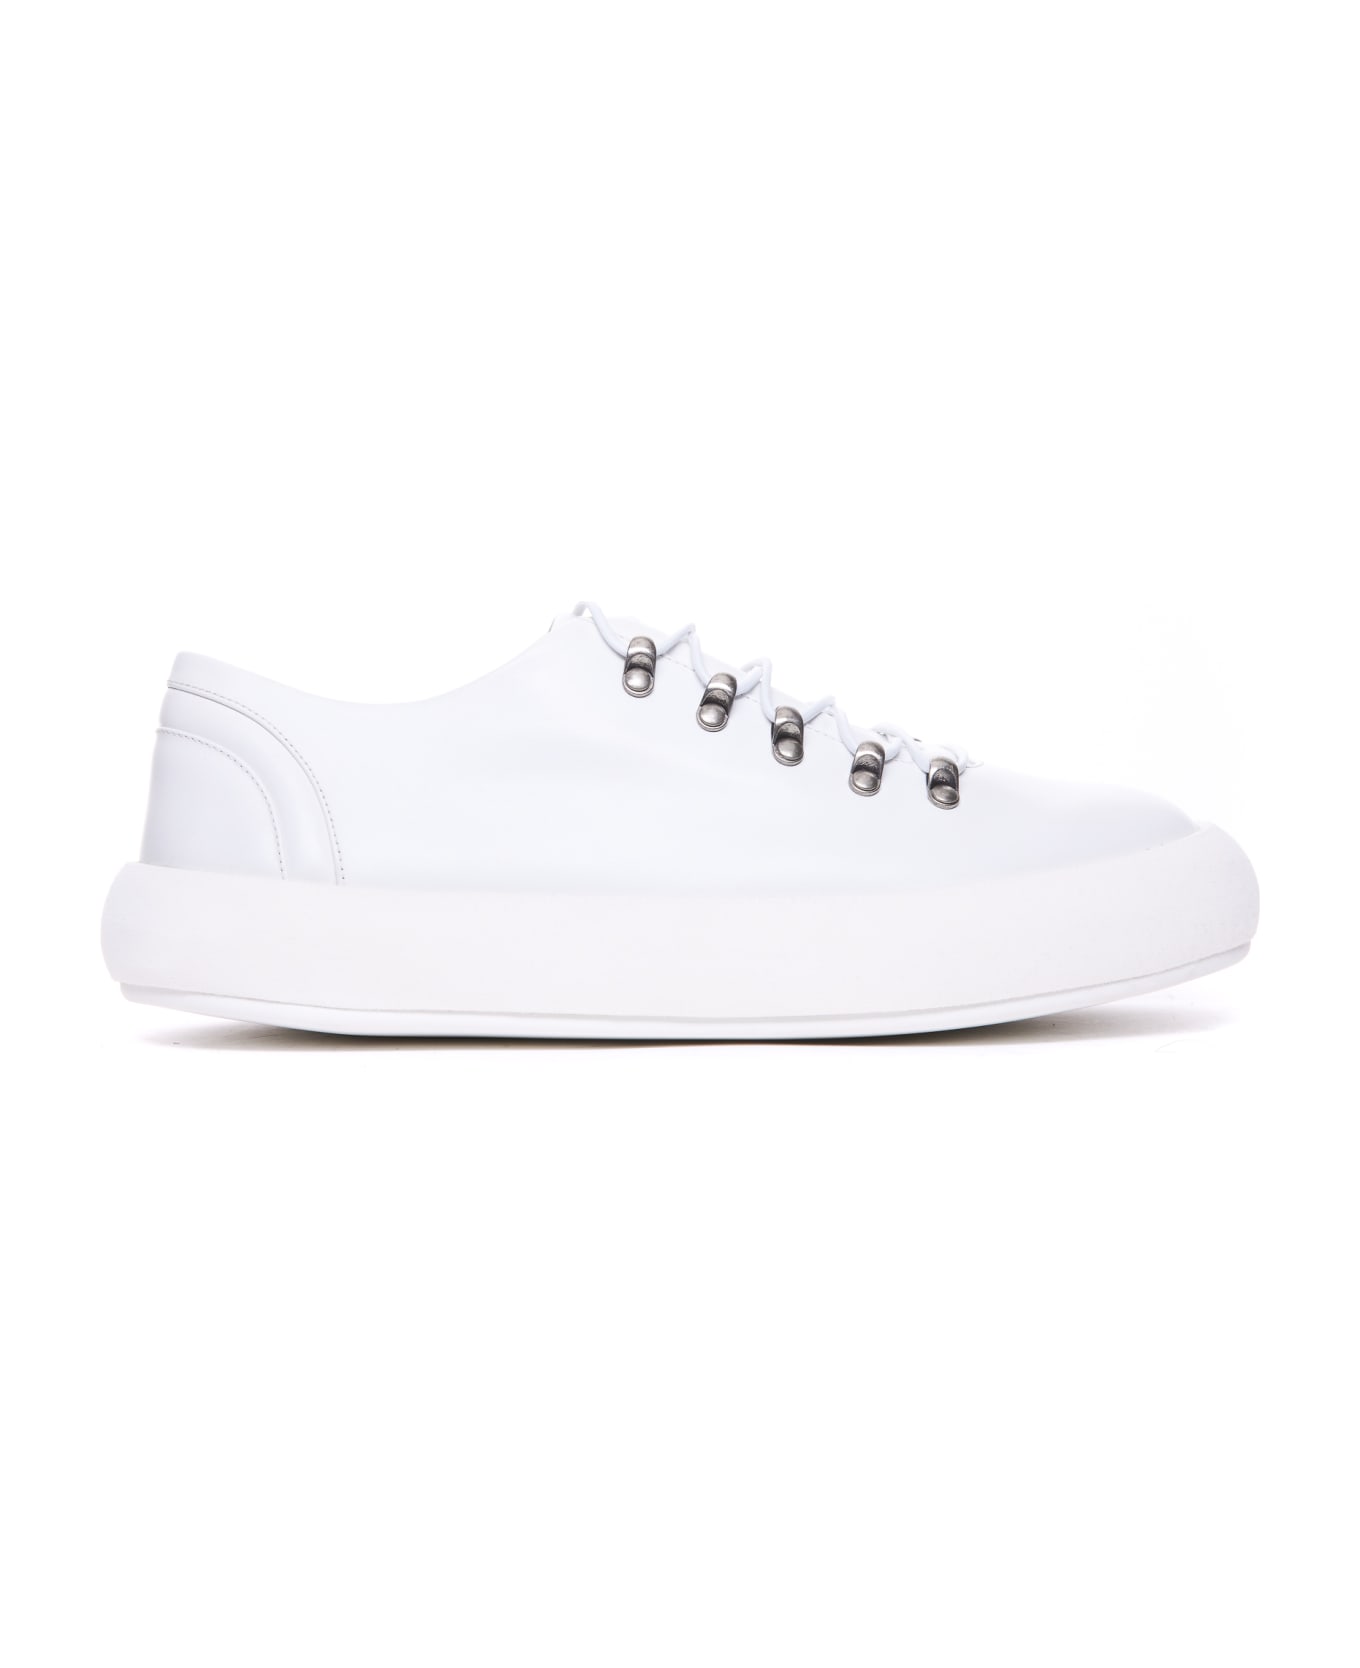 Marsell Espana Lace Up Shoes - White